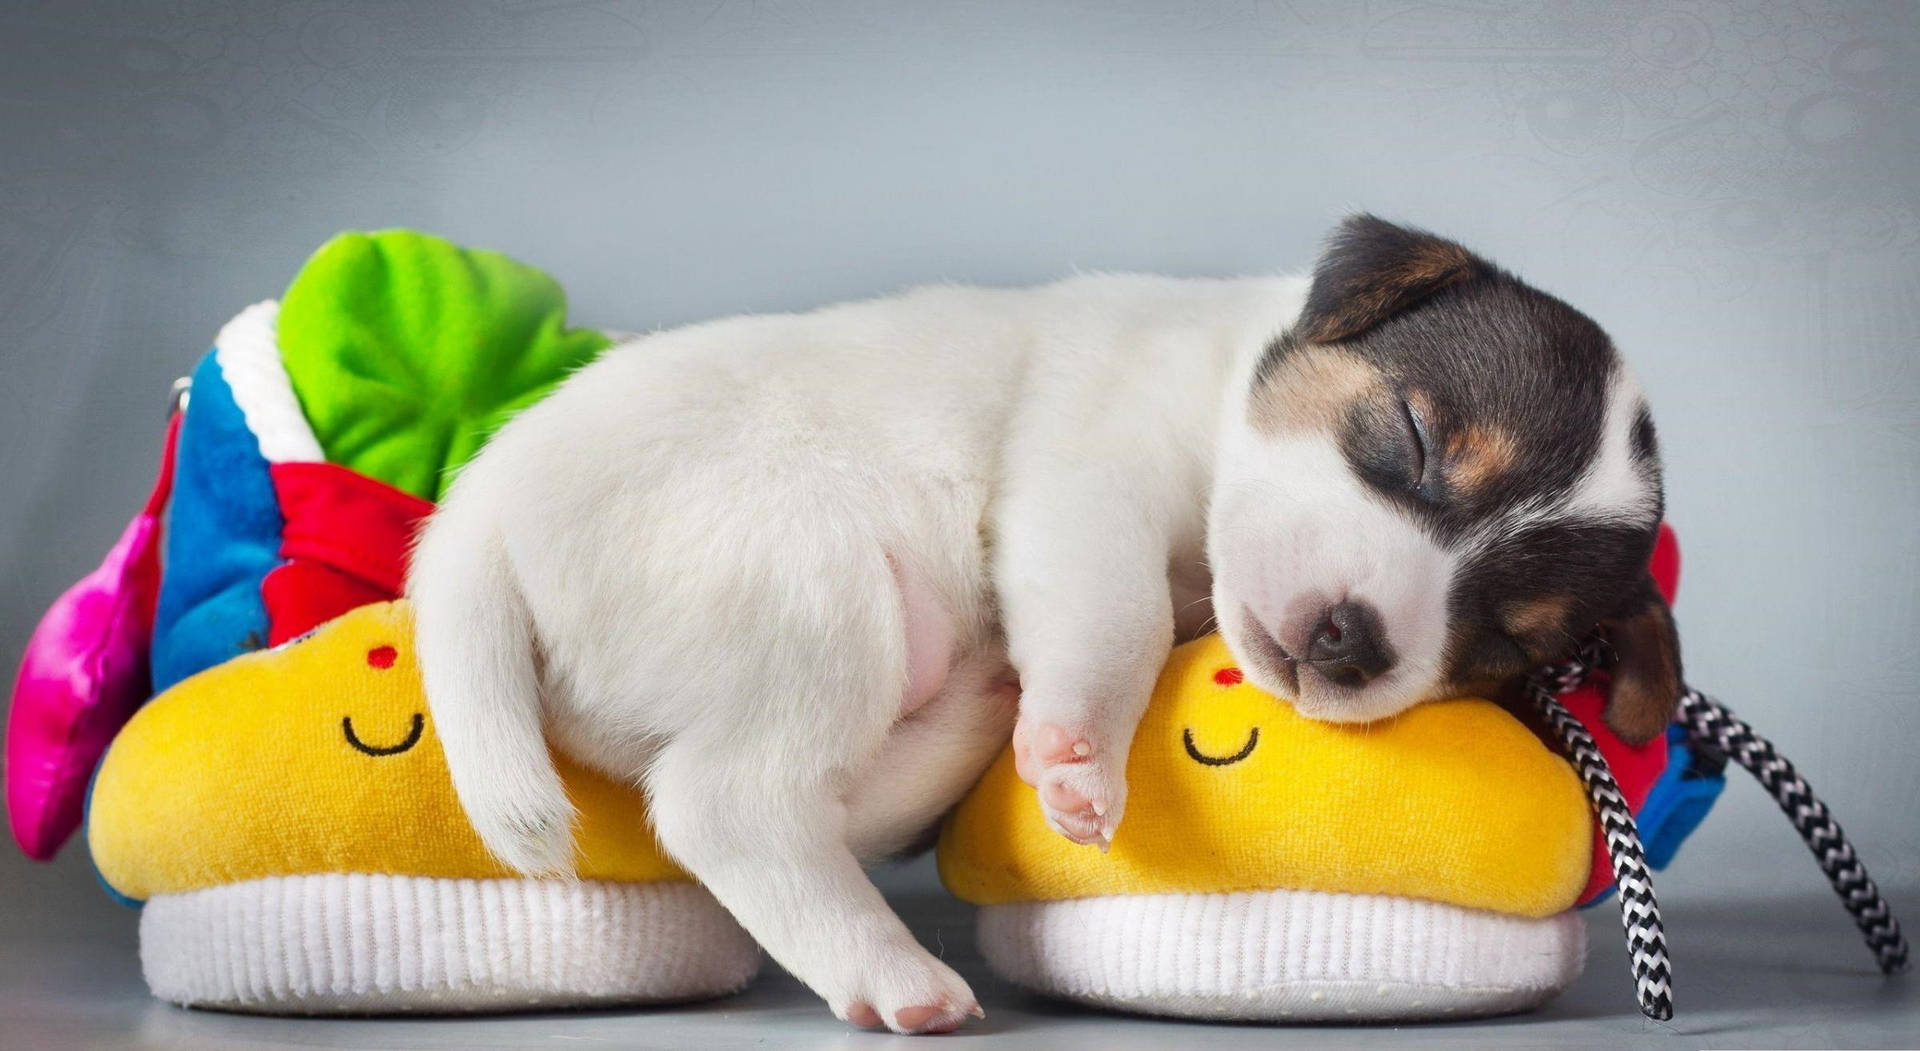 Cute Sleeping Baby Dog With Pillow Toys Wallpaper